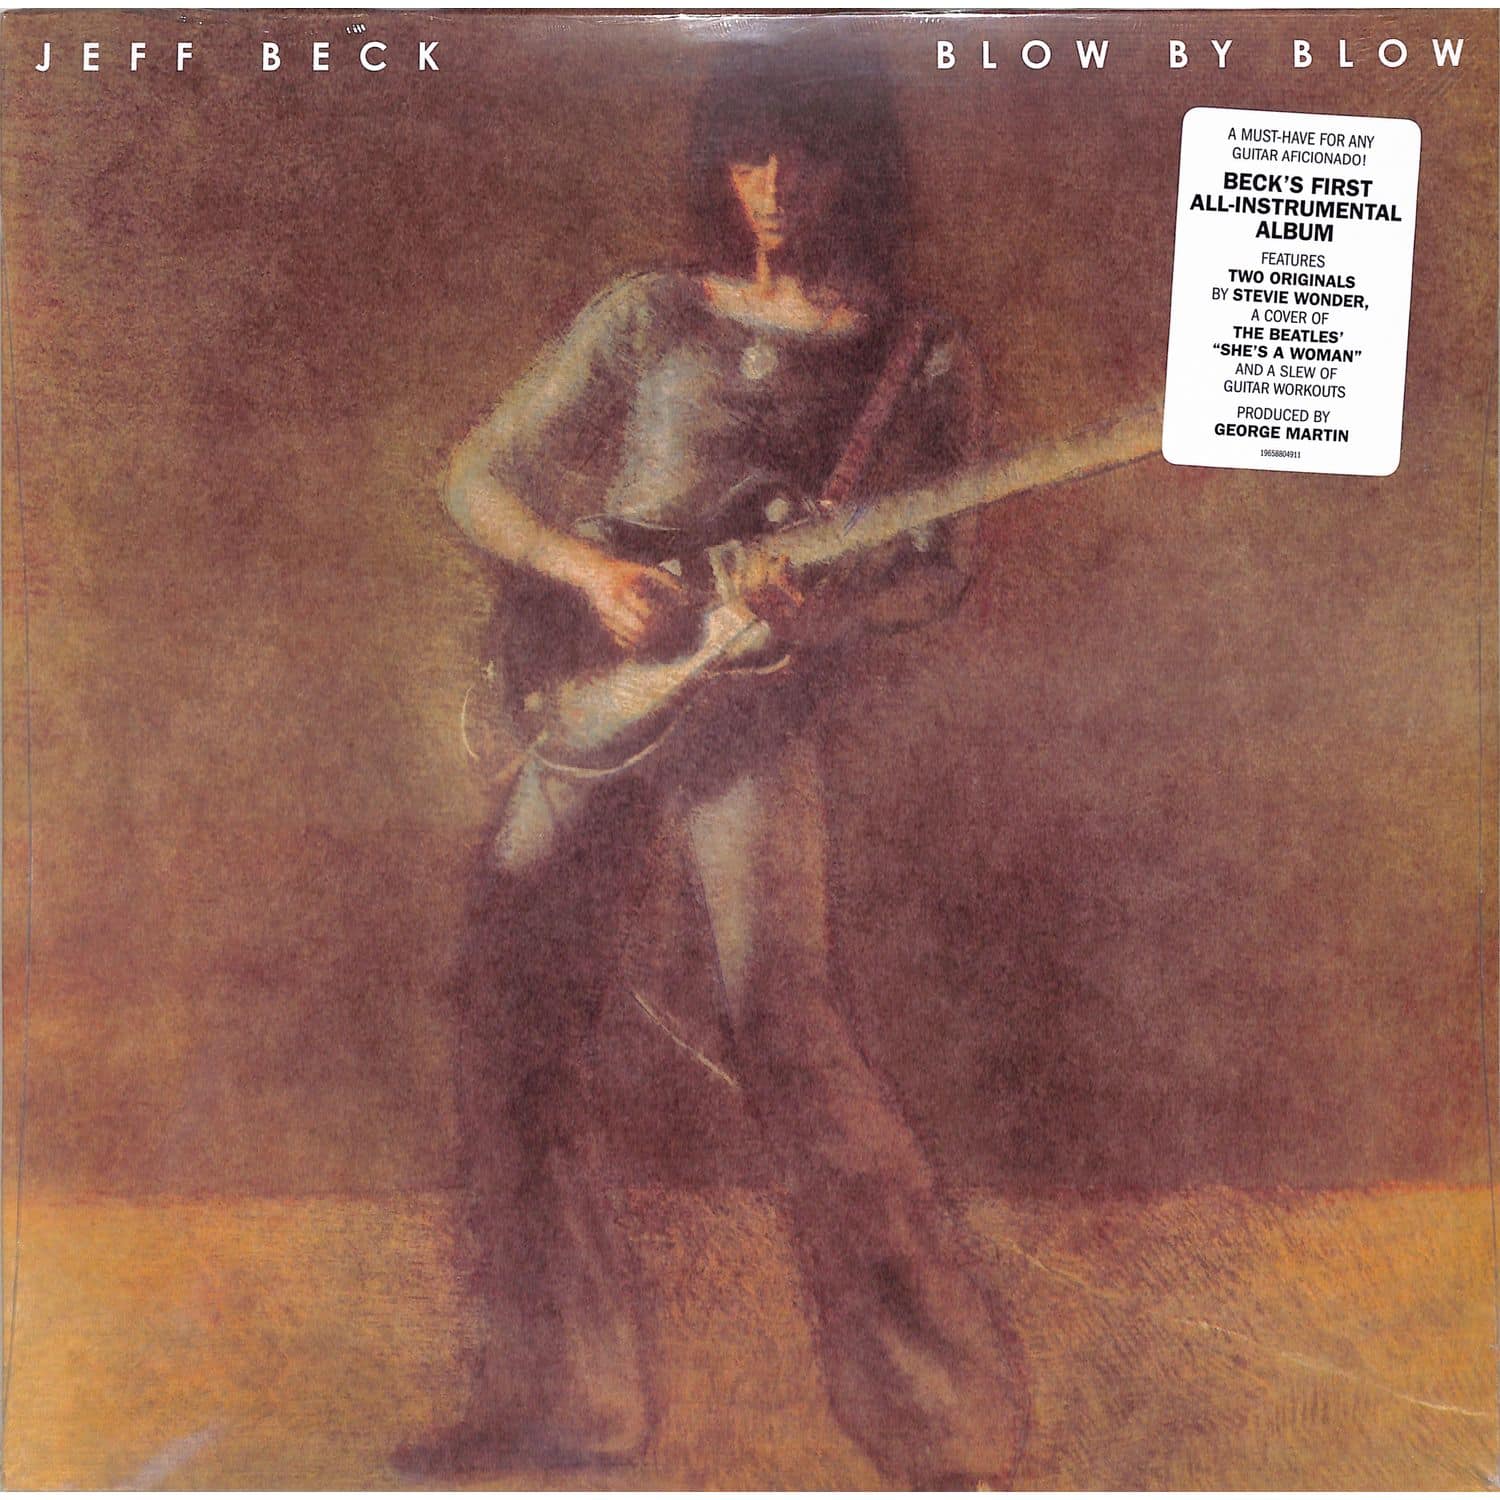 Jeff Beck - BLOW BY BLOW 